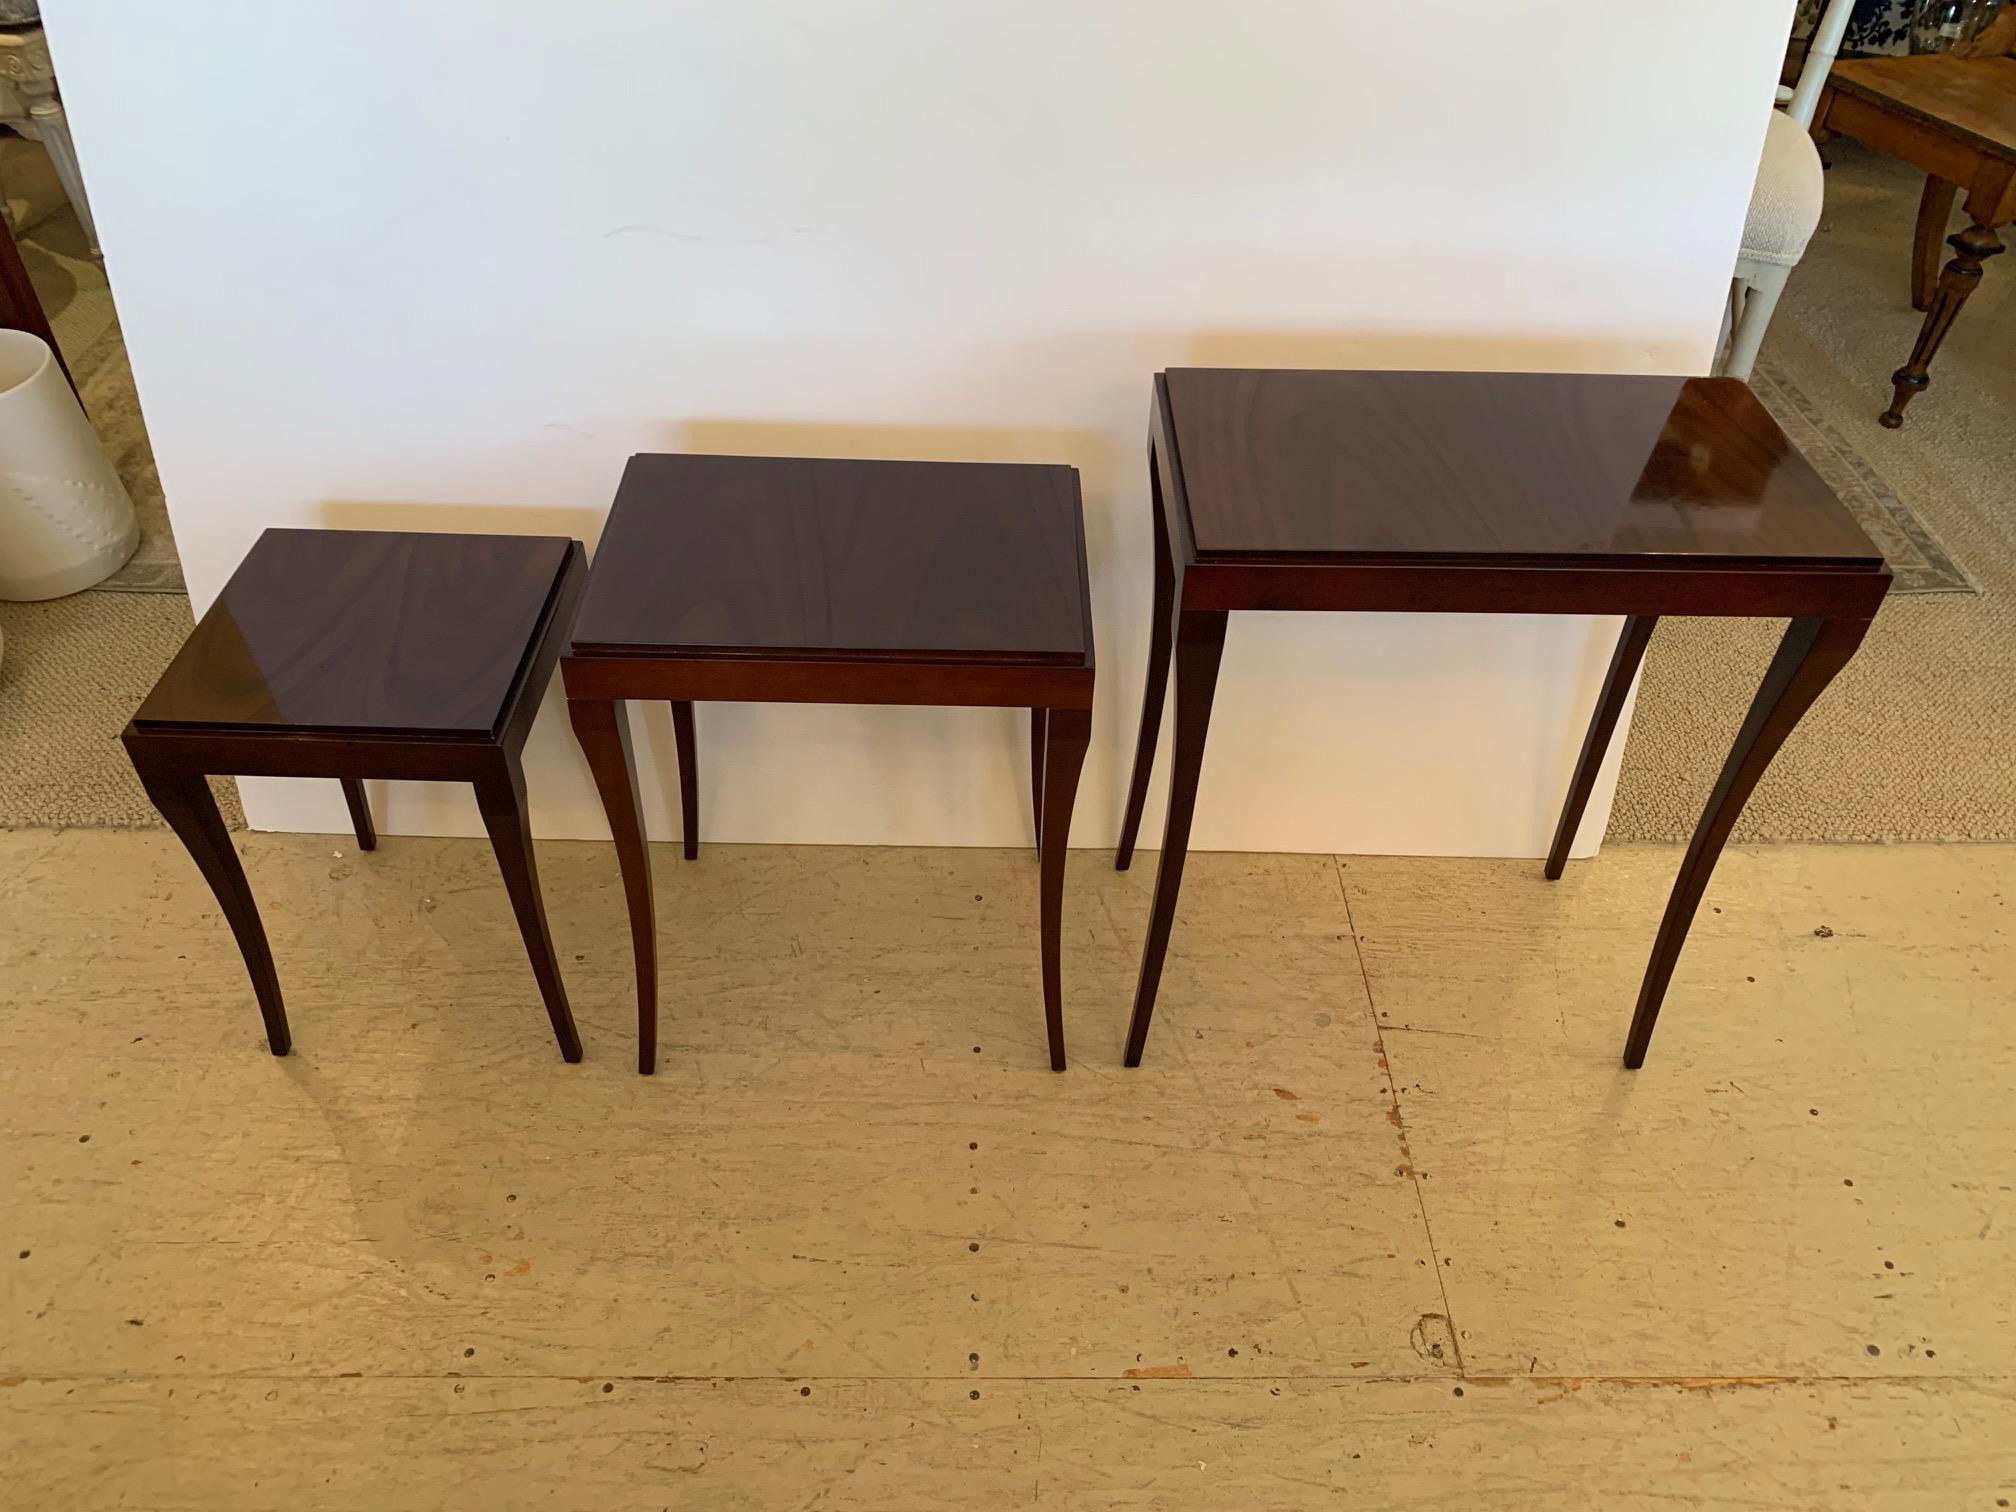 Versatile sleek high gloss mahogany set of 3 nesting tables with lovely thin tapered legs.
Large: 24” H x 12” D x 20.5” W
Medium 20.25” H x 11.75” D x 16” W 
Small: 16.5” H x 11.75” Square.